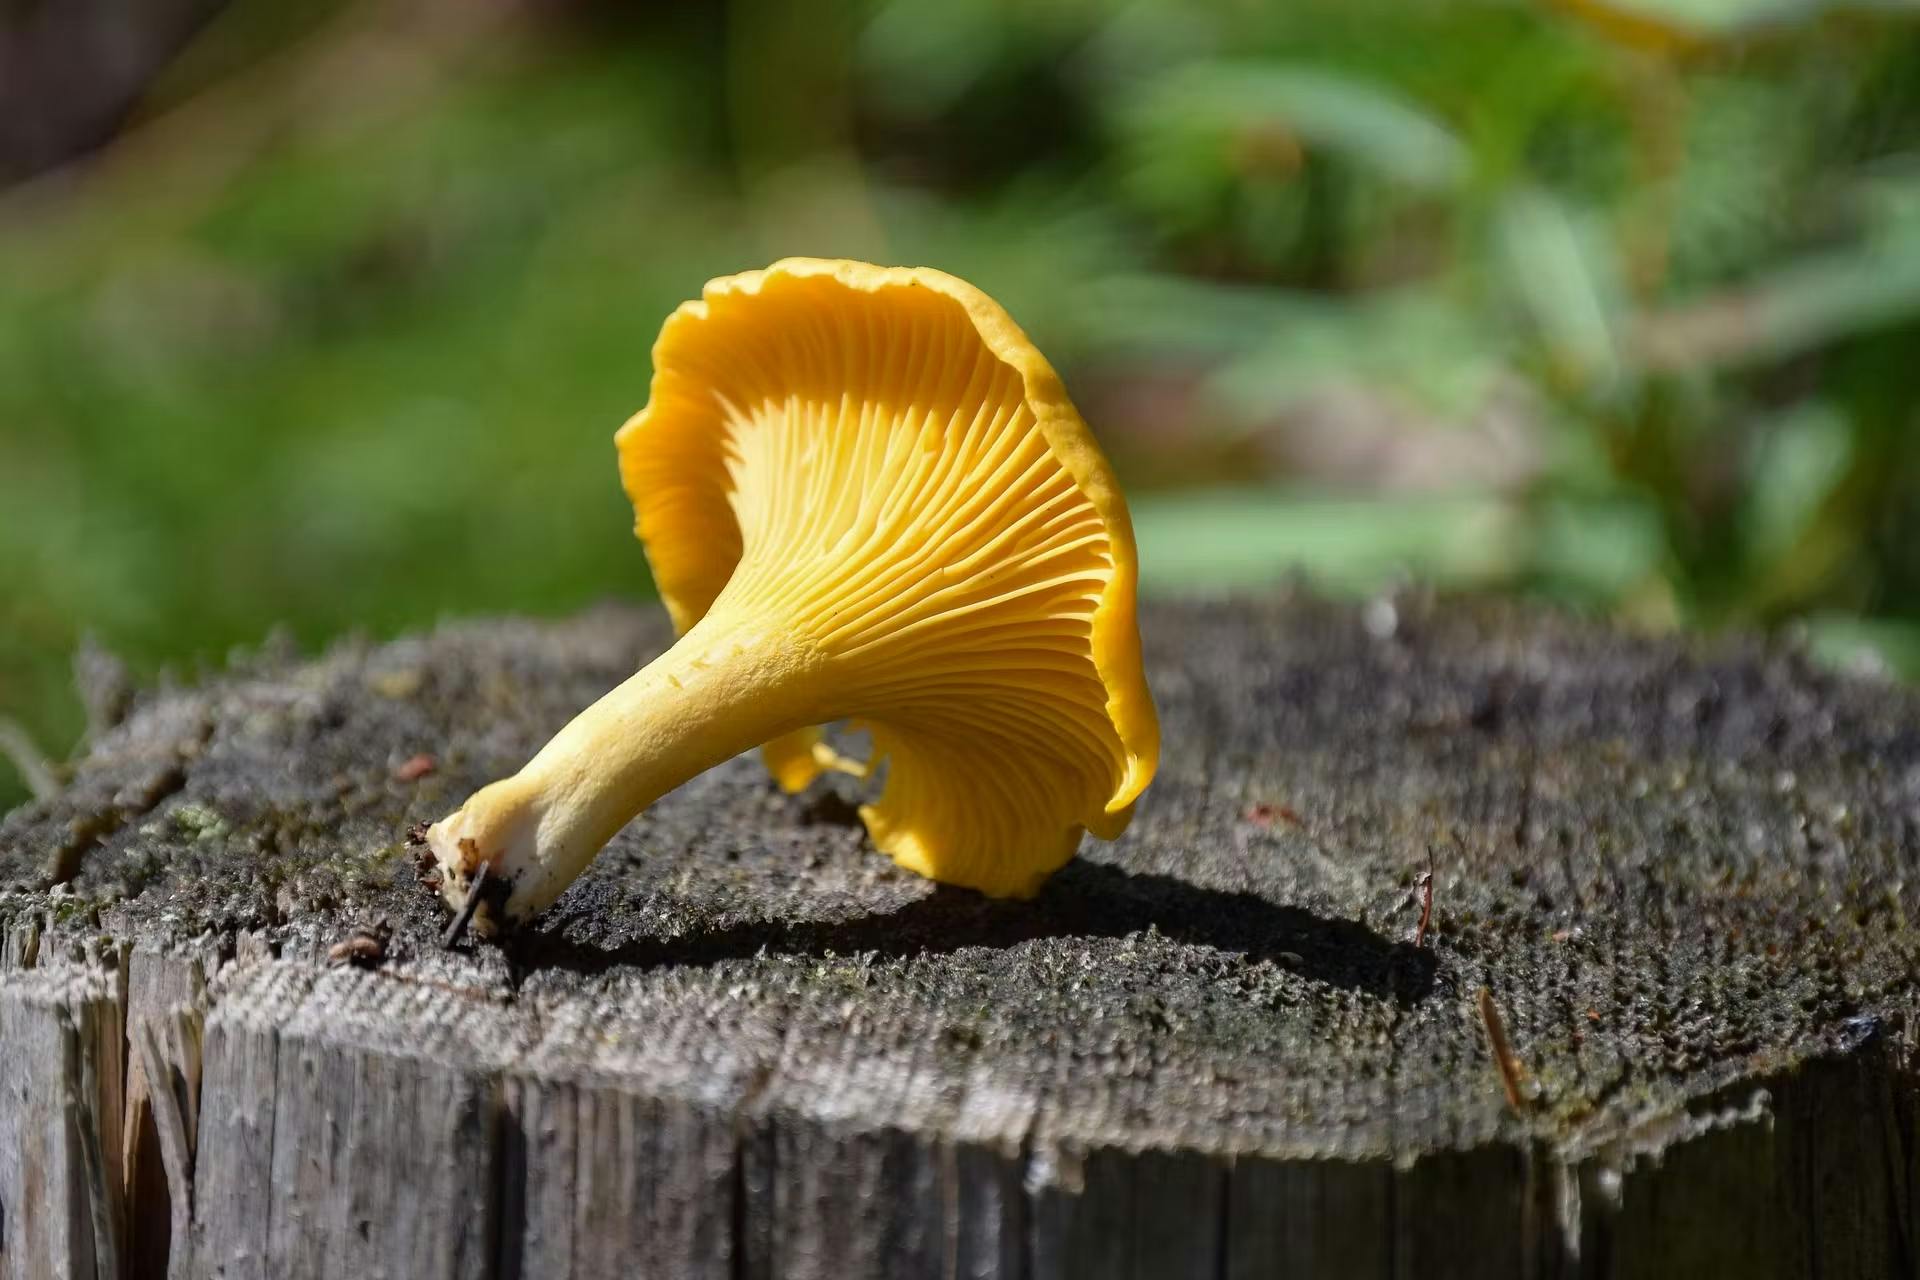 The Rich and Delicate Flavor of Chanterelle Mushrooms